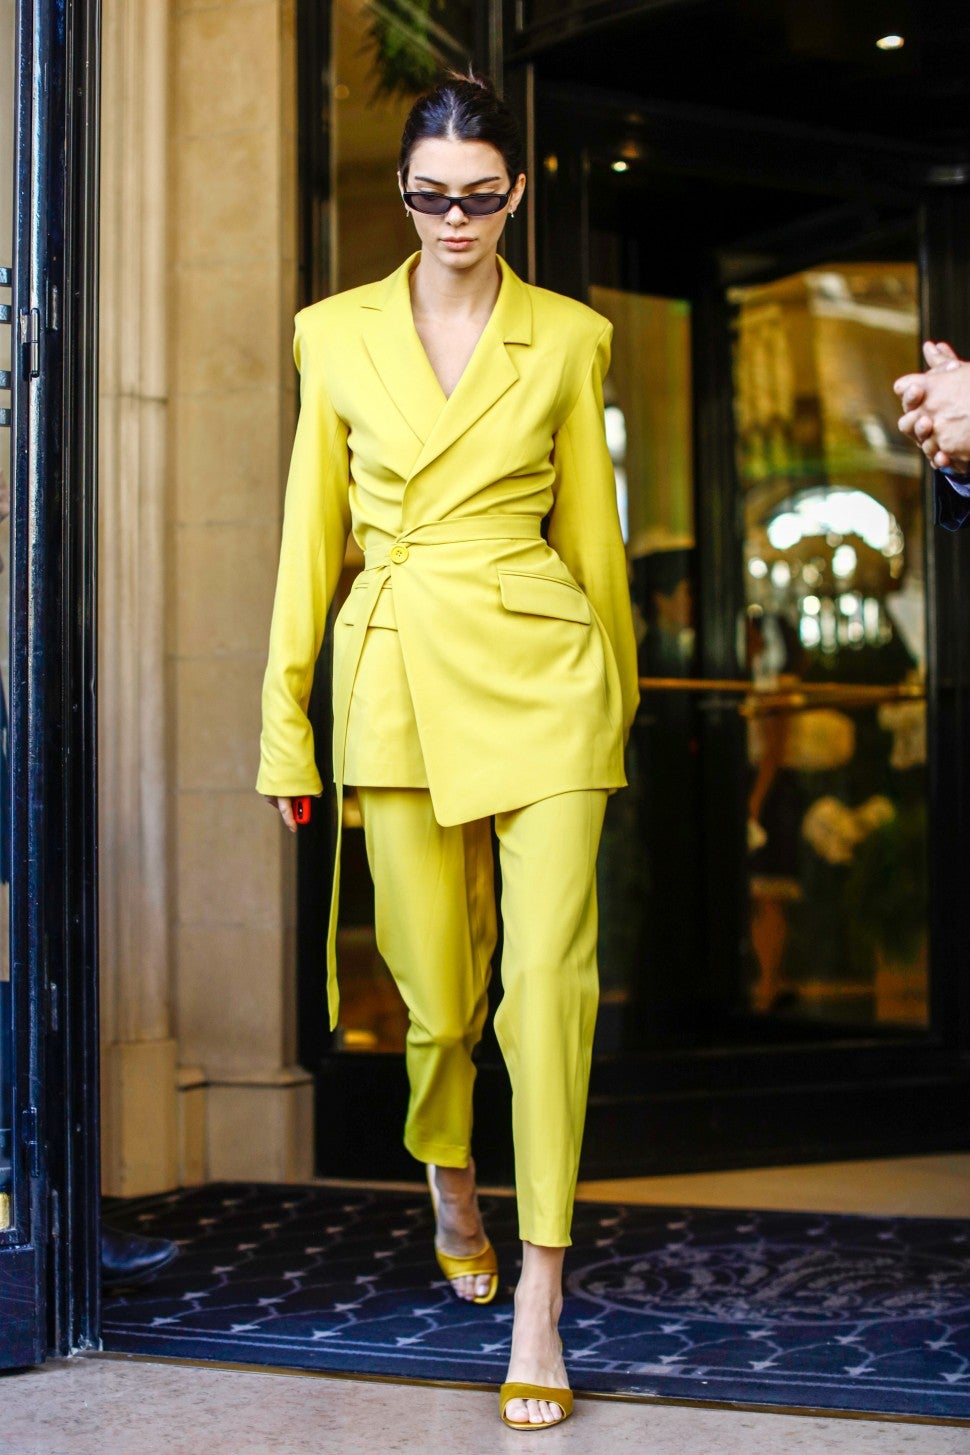 Kendall Jenner in yellow suit in Paris